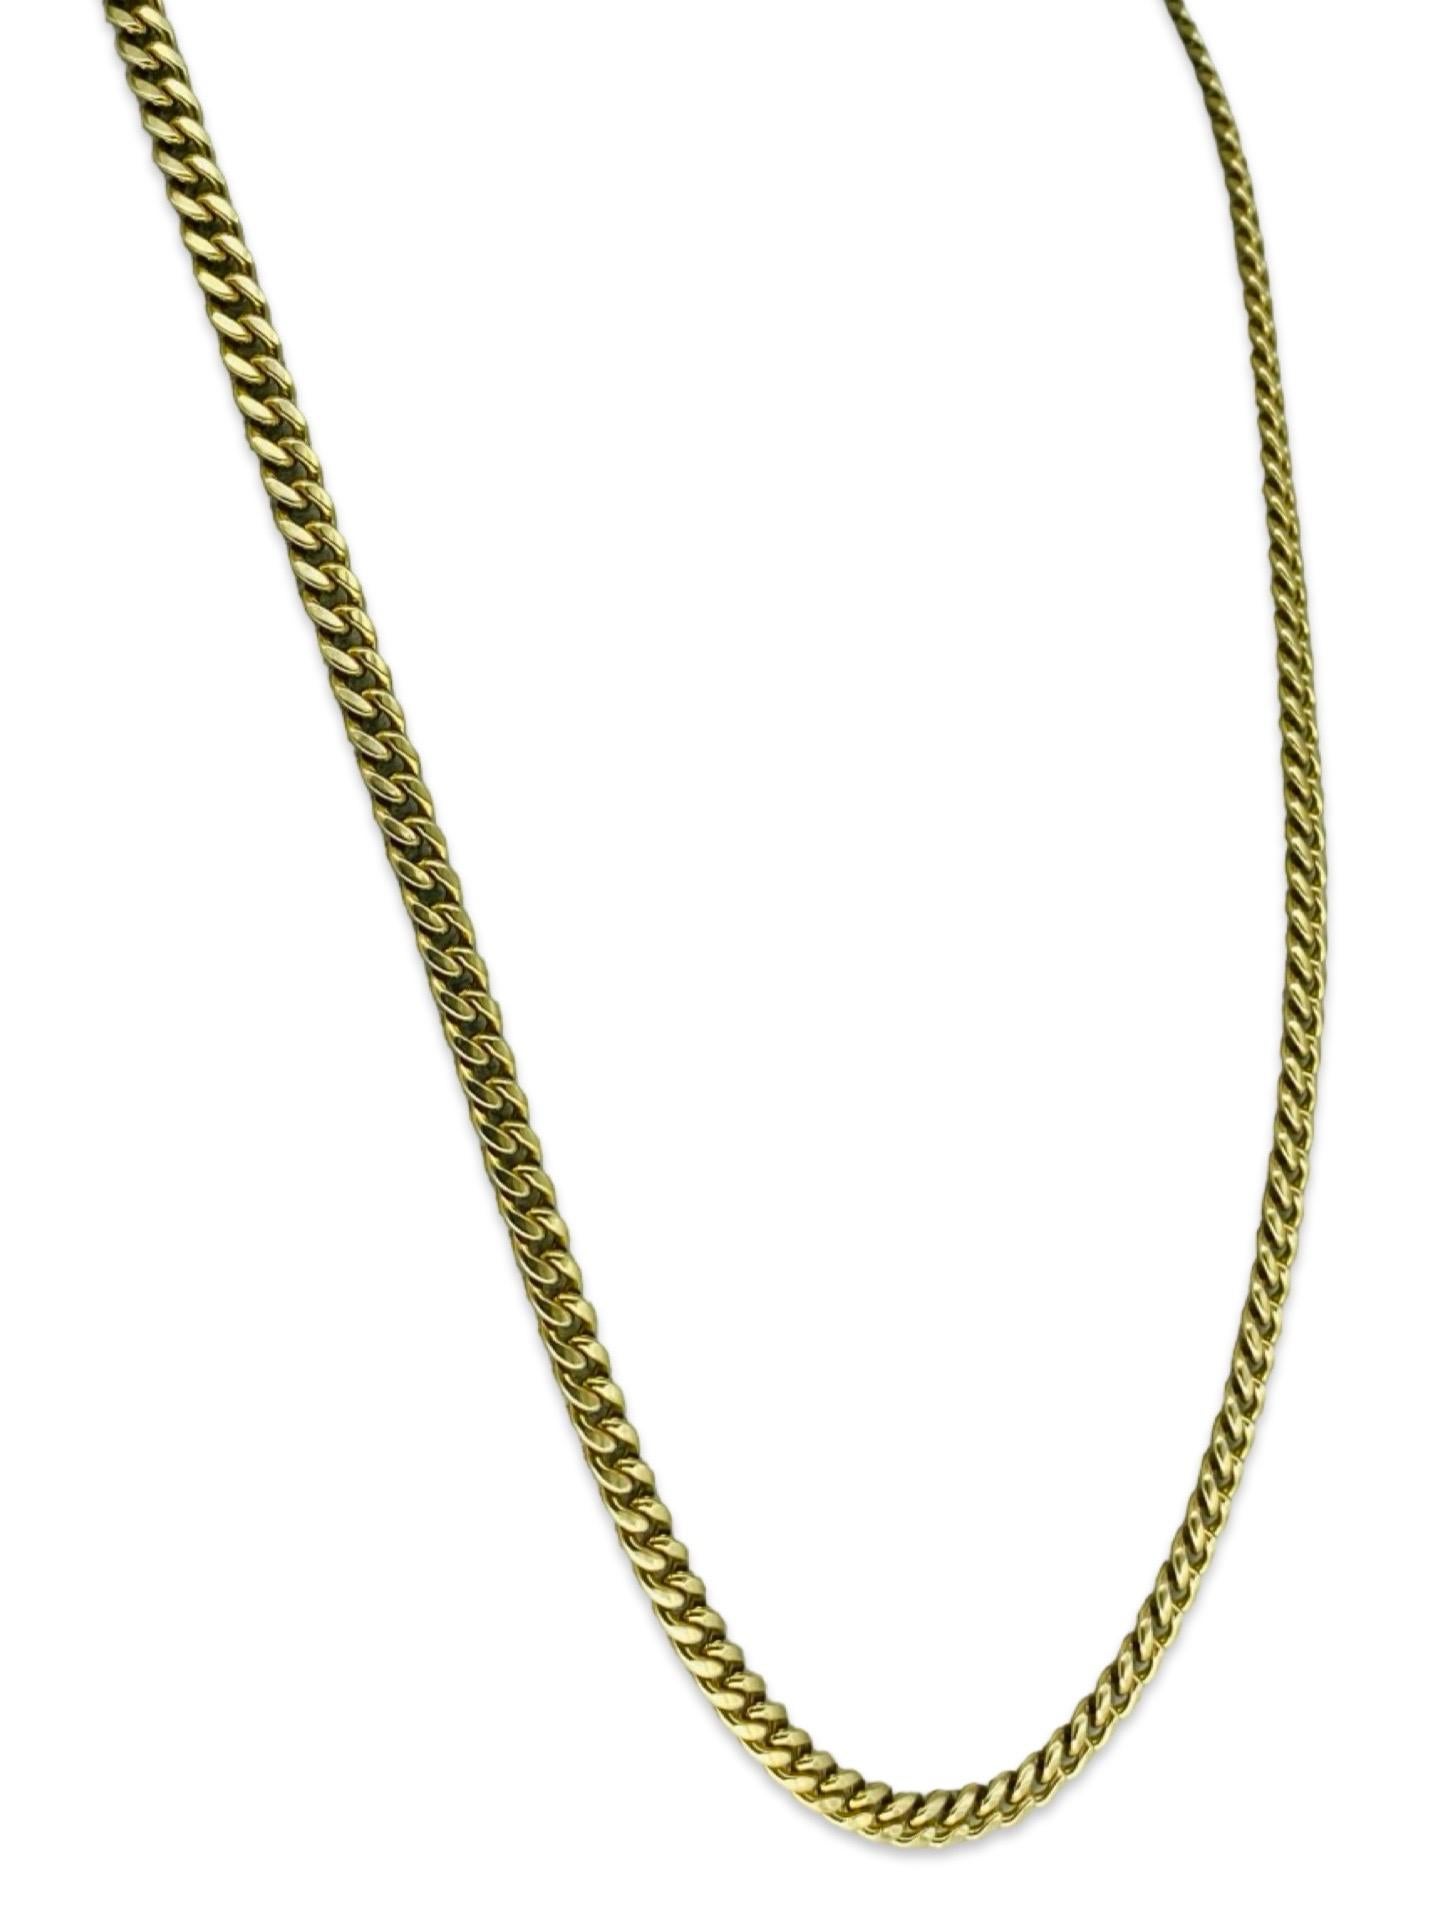 Vintage 5.25mm Cuban Link Chain Solid Gold 14k Italy In Good Condition For Sale In Miami, FL